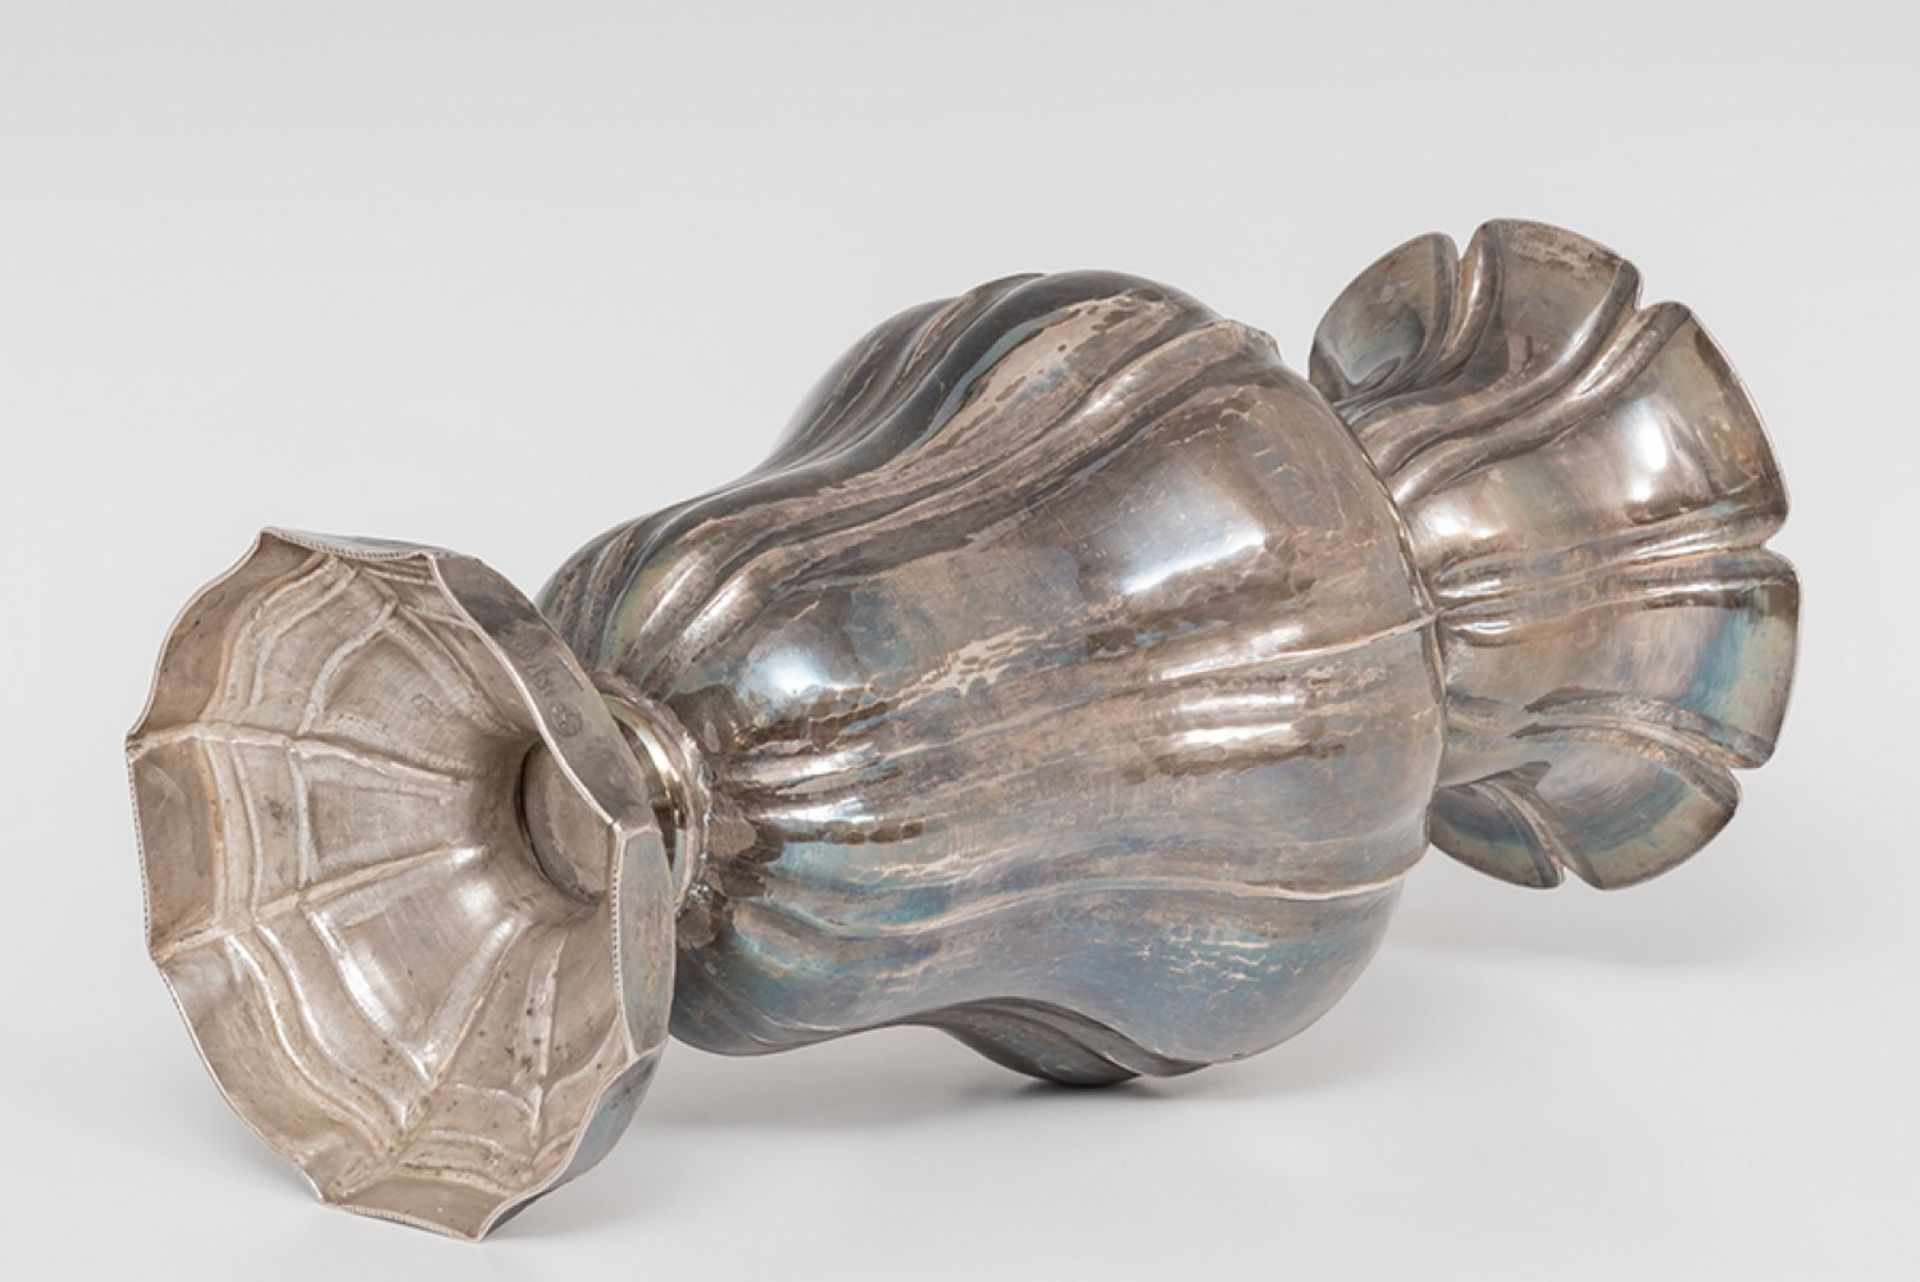 Altar vase in stamped silver. Mexico. 18th centuryWeight: 959.1 g. Measure: 27.5 x 14 cm.Vase - Image 2 of 6